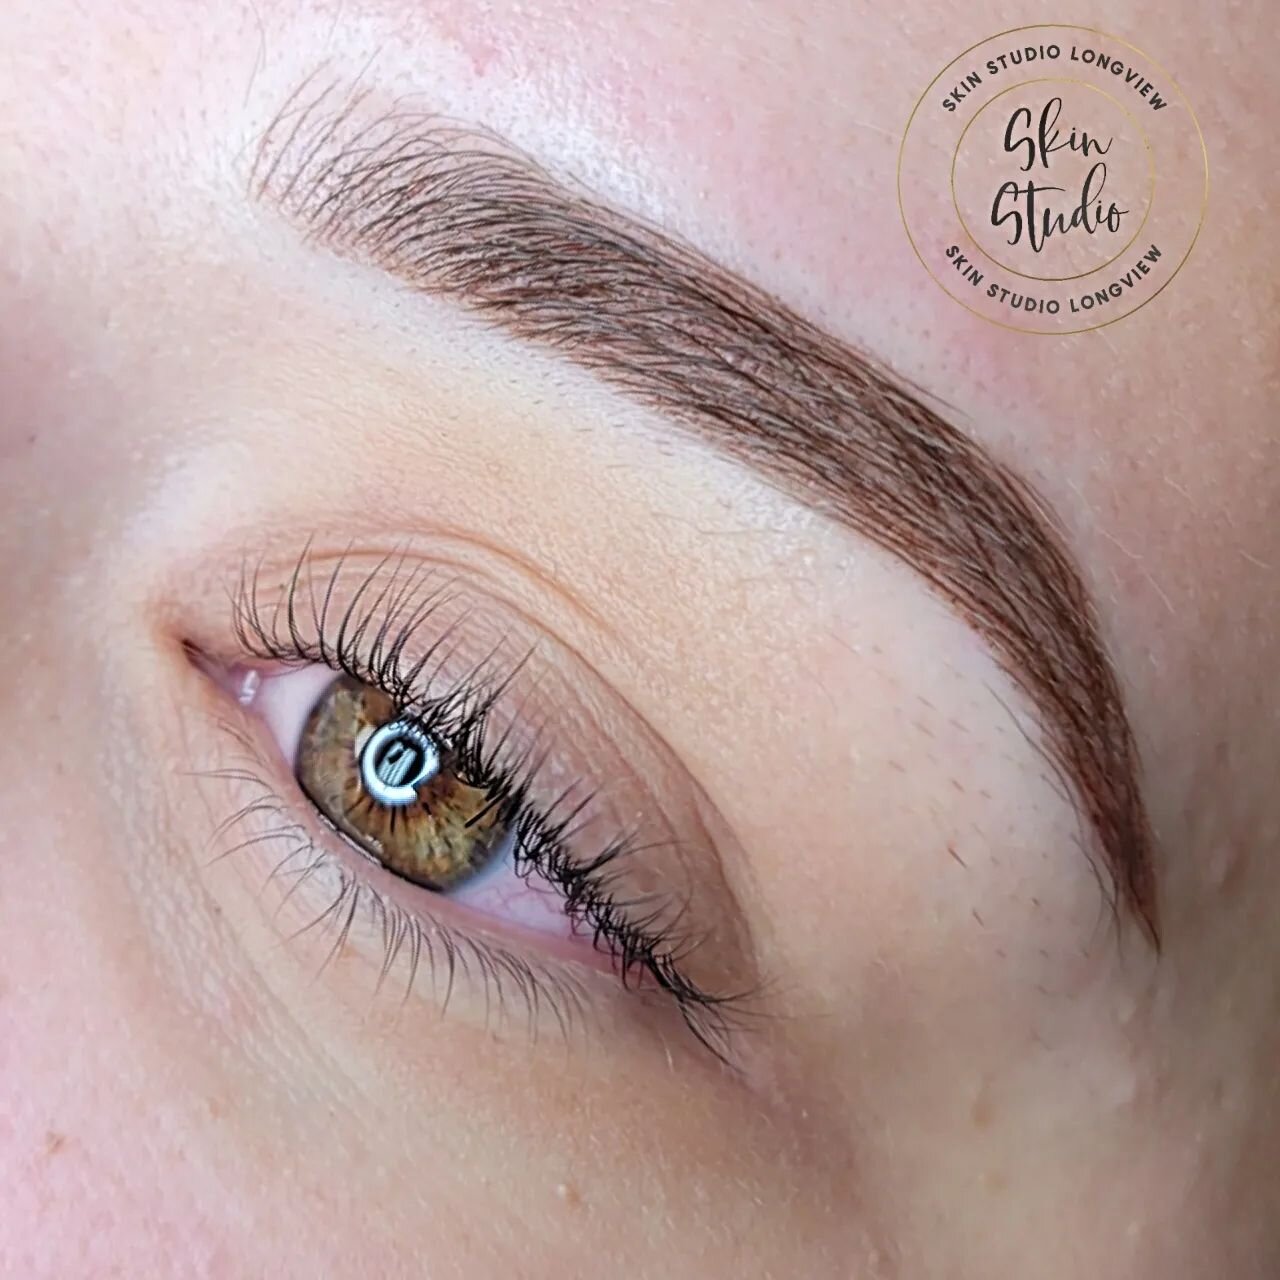 Sweatproof, waterproof, smudge free, summer ready brows 💦
Also, a 1 week old Lash Lift &amp; Tint ♡
 ⊶⊷⊶⊷⊶⊷⋆⊶⊷⊶⊷⊶
▫️Combo Brows:
&bull; Great for all skin types
&bull; Lasts 1-2 years
&bull; Takes 2-3 hours
&bull; Pain level 1-2 out of 10
&bull; 14 